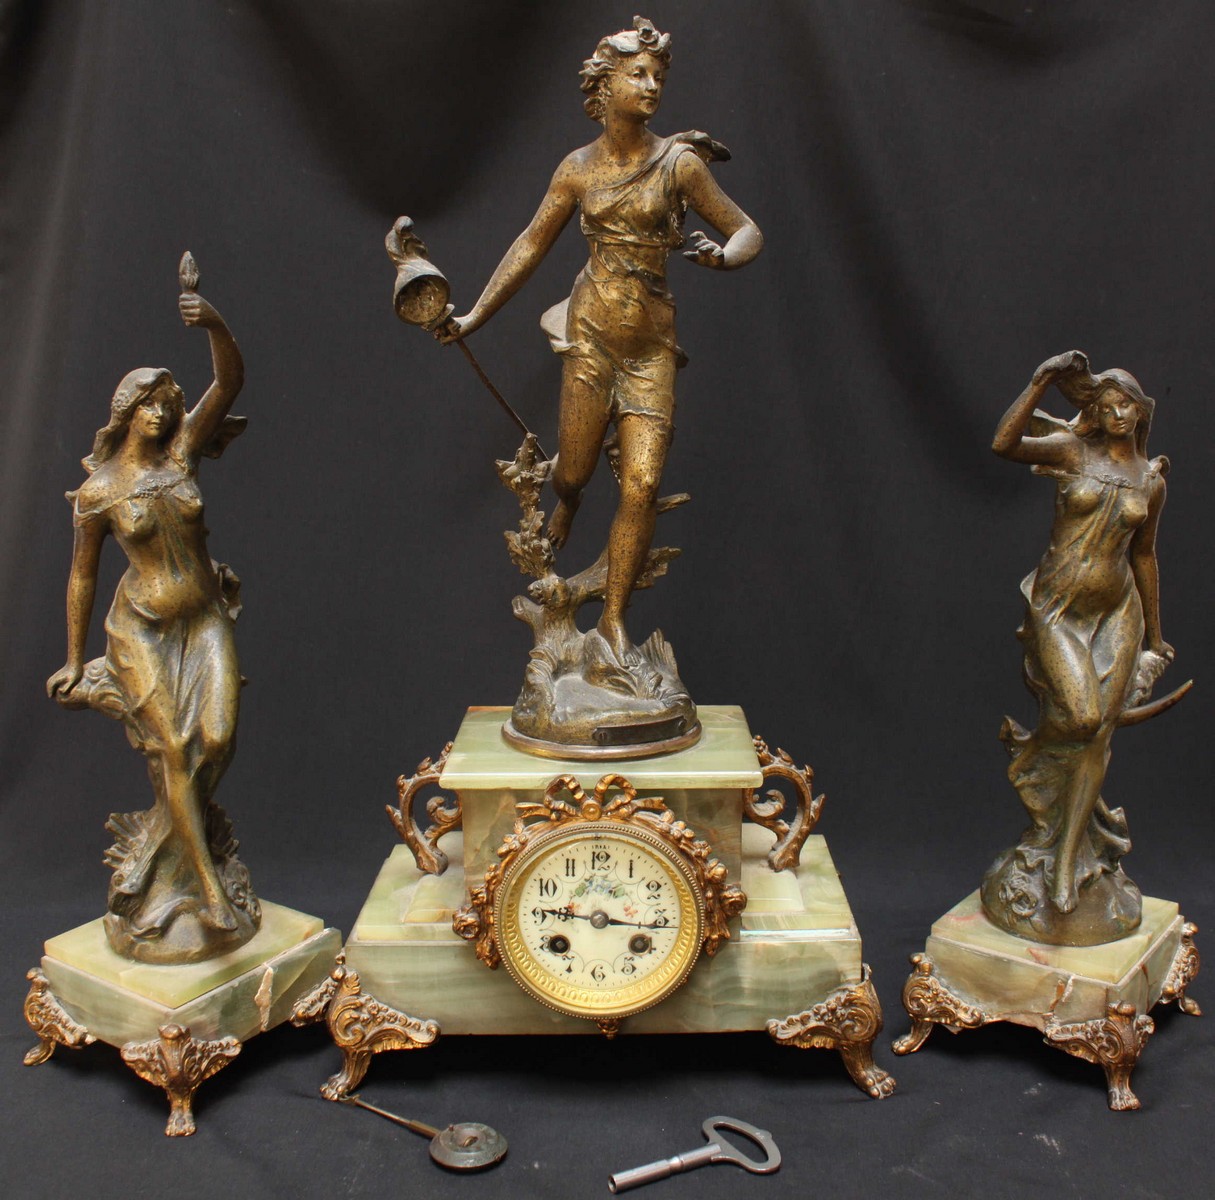 A French onyx and spelter figural clock garniture, formed as a classical lady stood atop an onyx